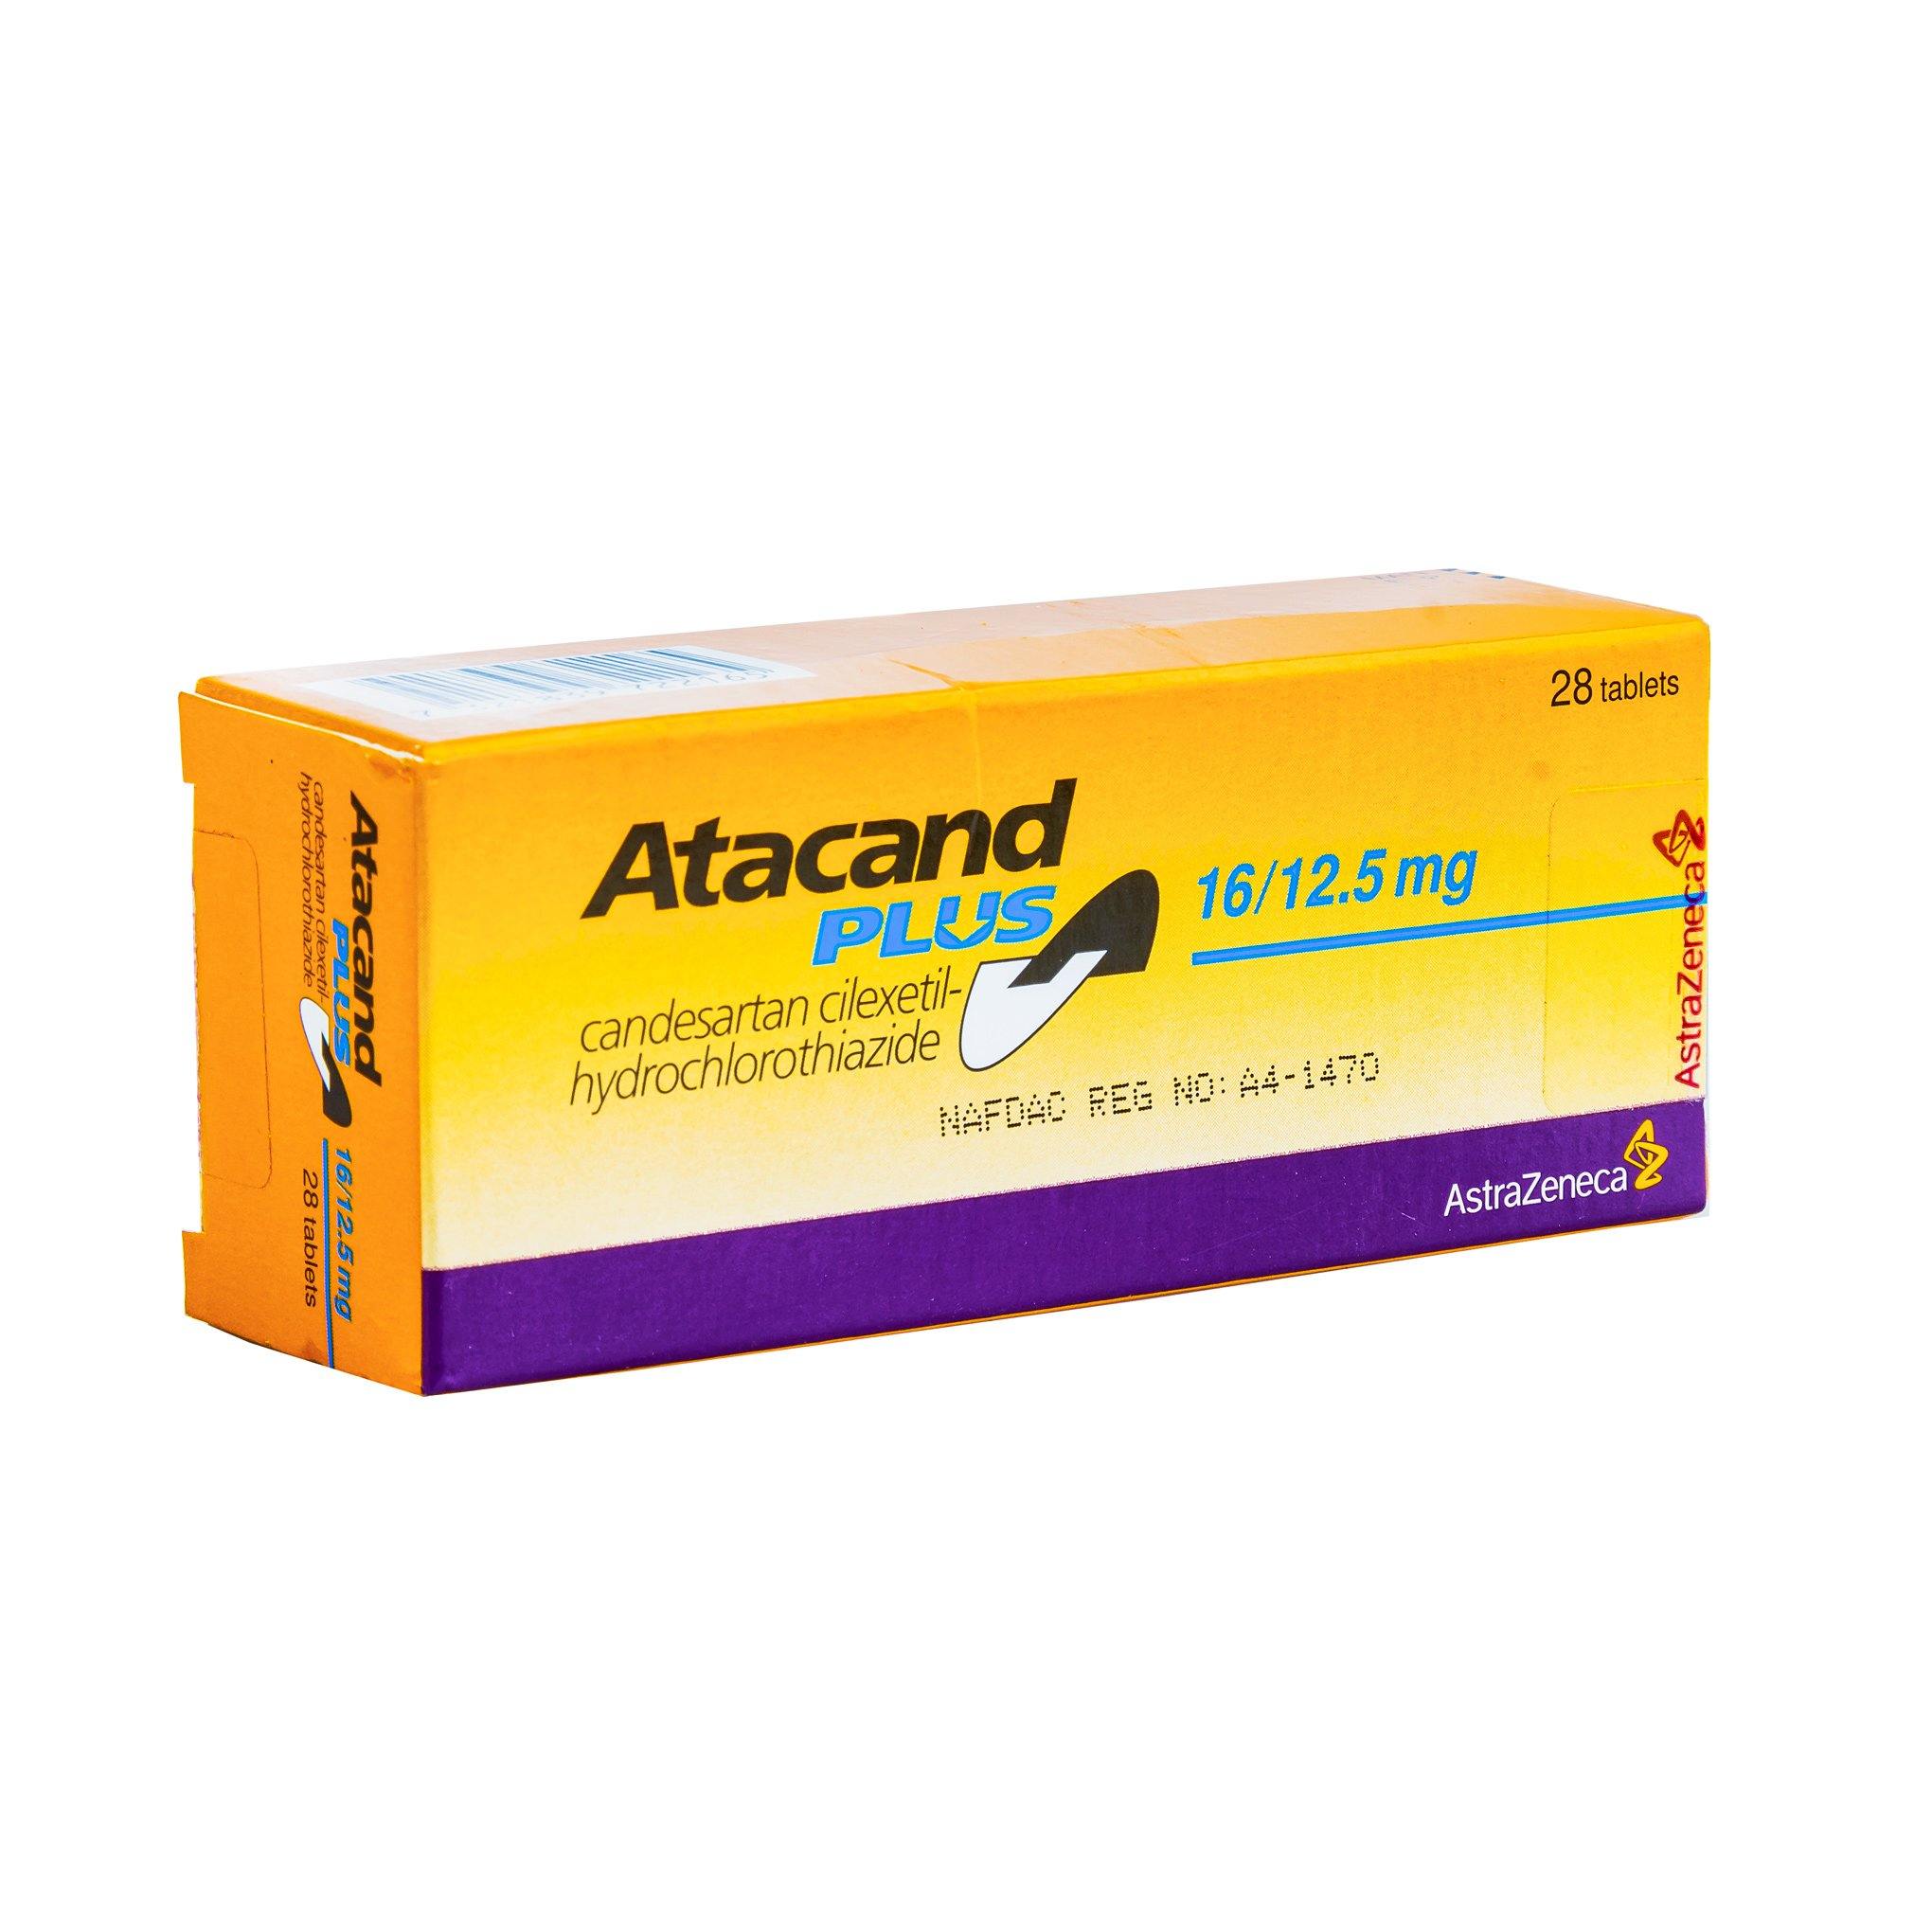 shop Atacand Plus 16/12.5mg x 28 Tablets from HealthPlus online pharmacy in Nigeria